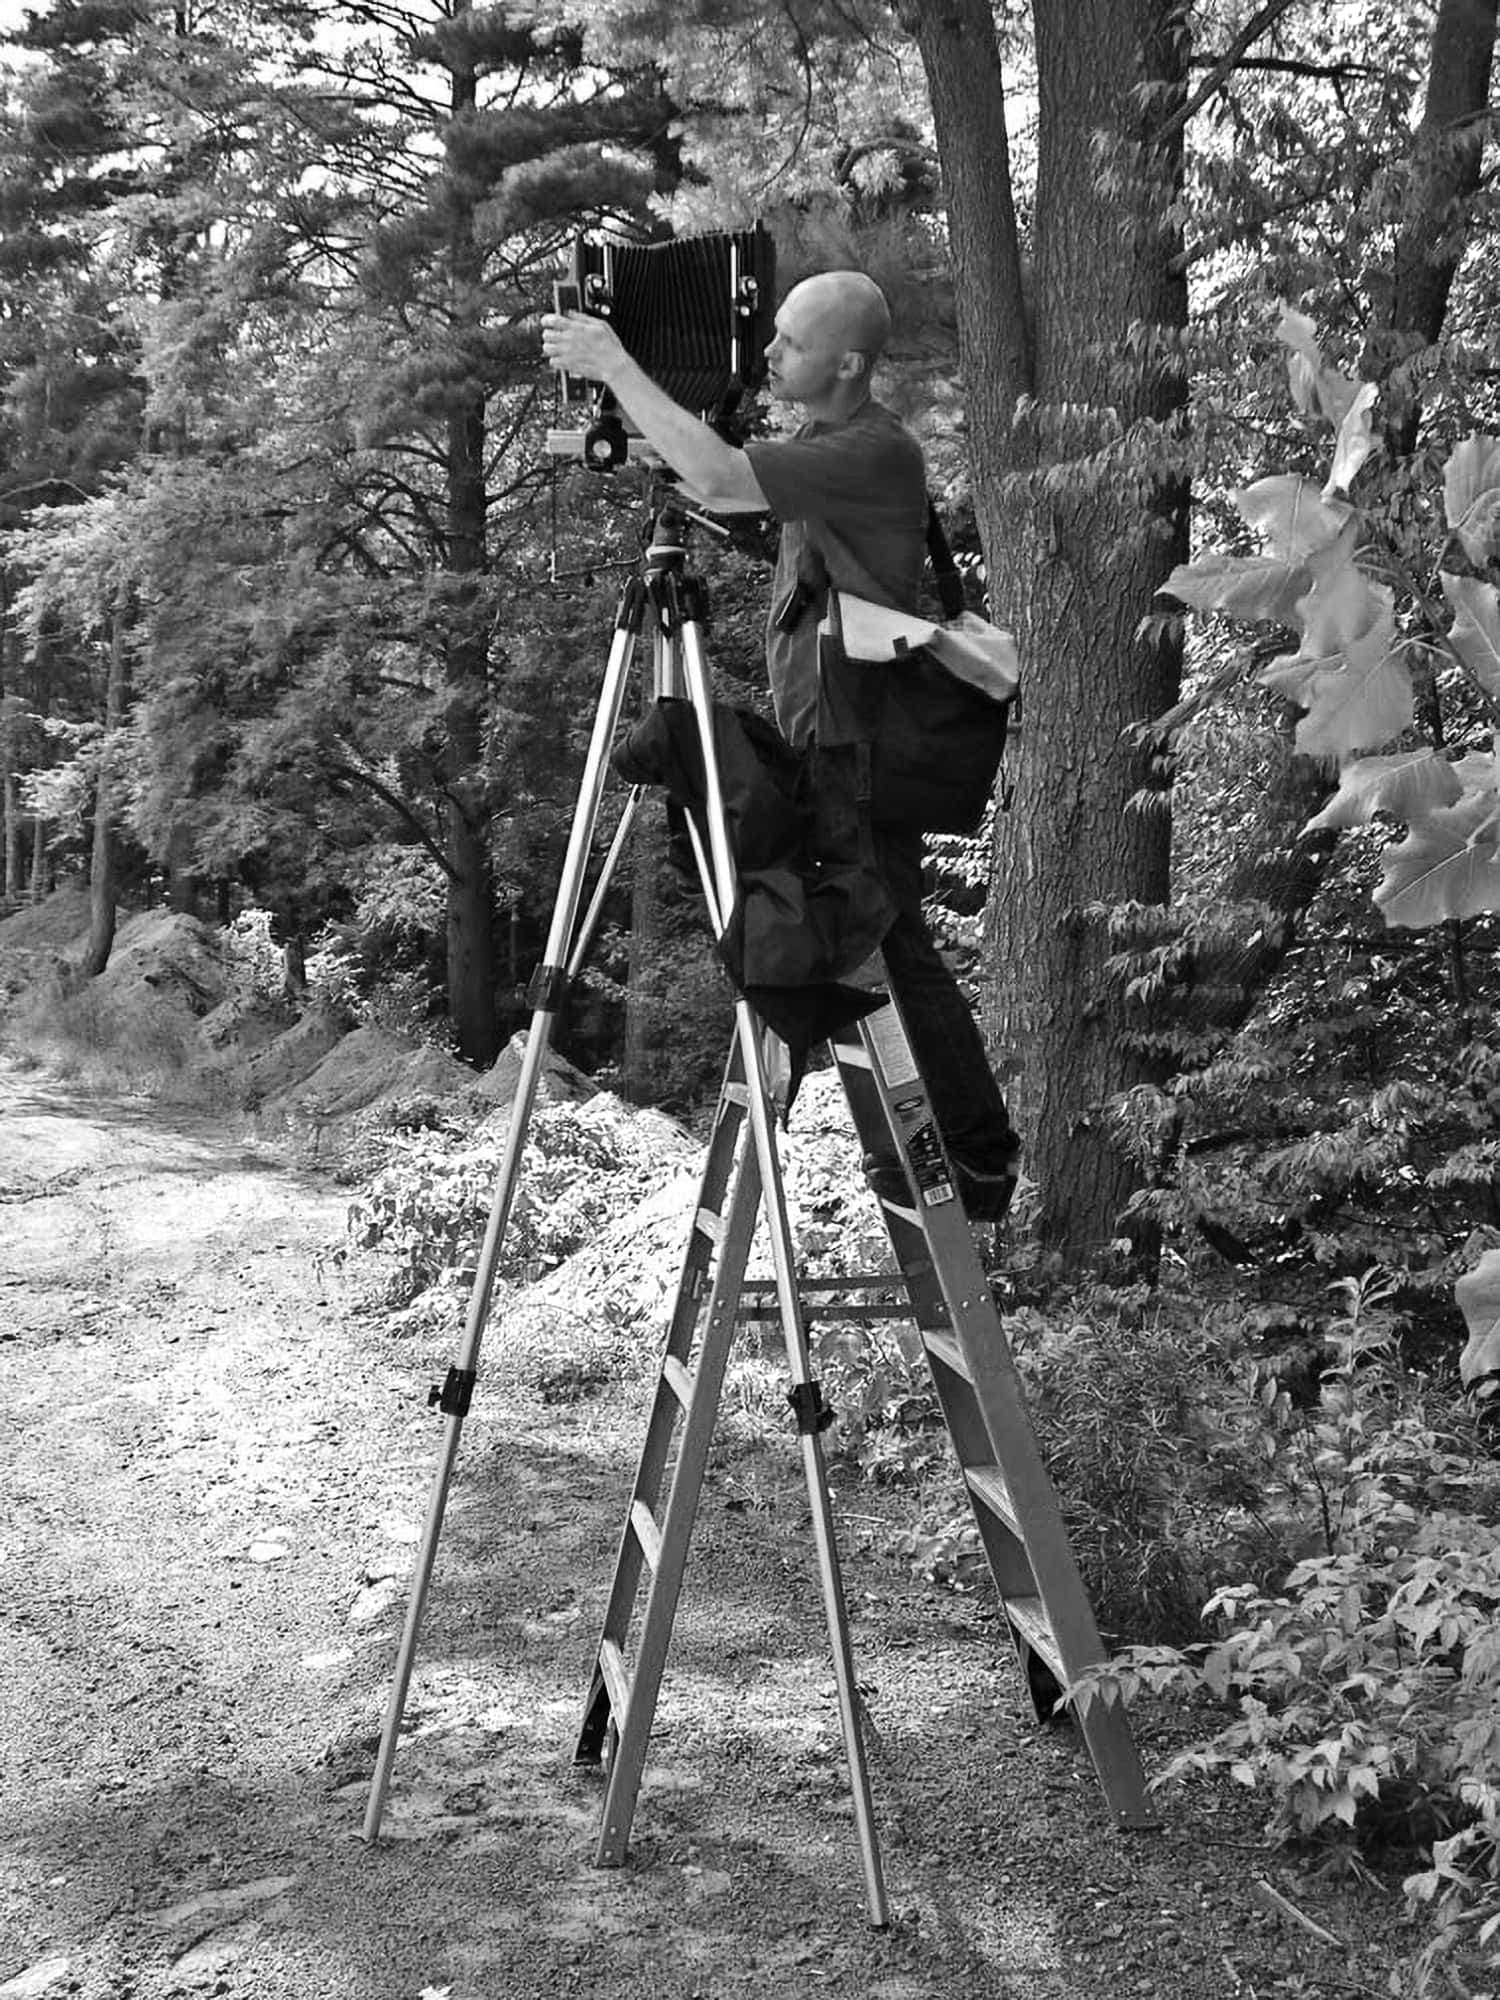 On a ladder focusing large format camera in woods.